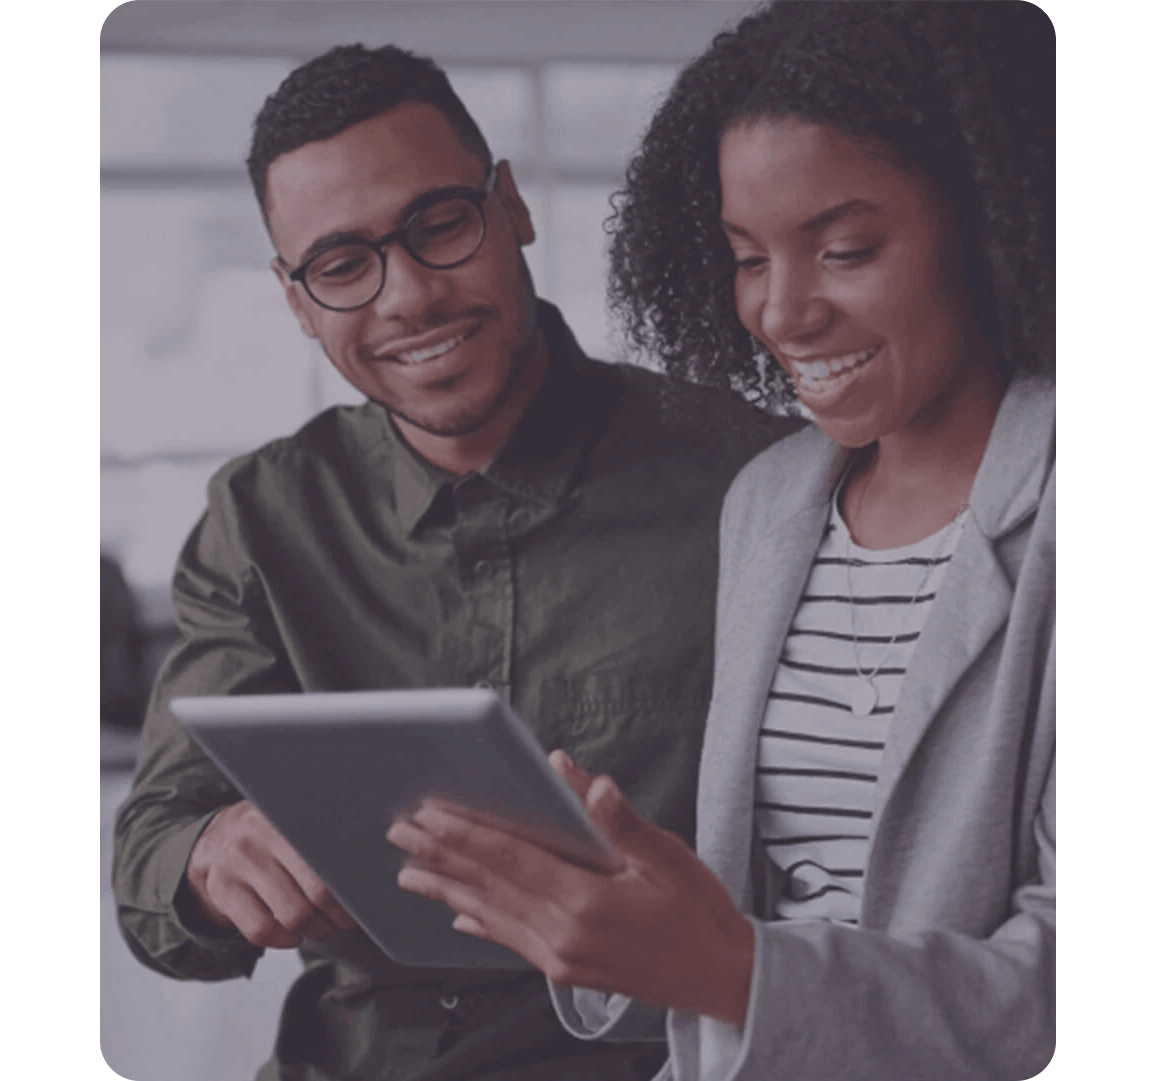 man and woman looking something on tablet and smiling